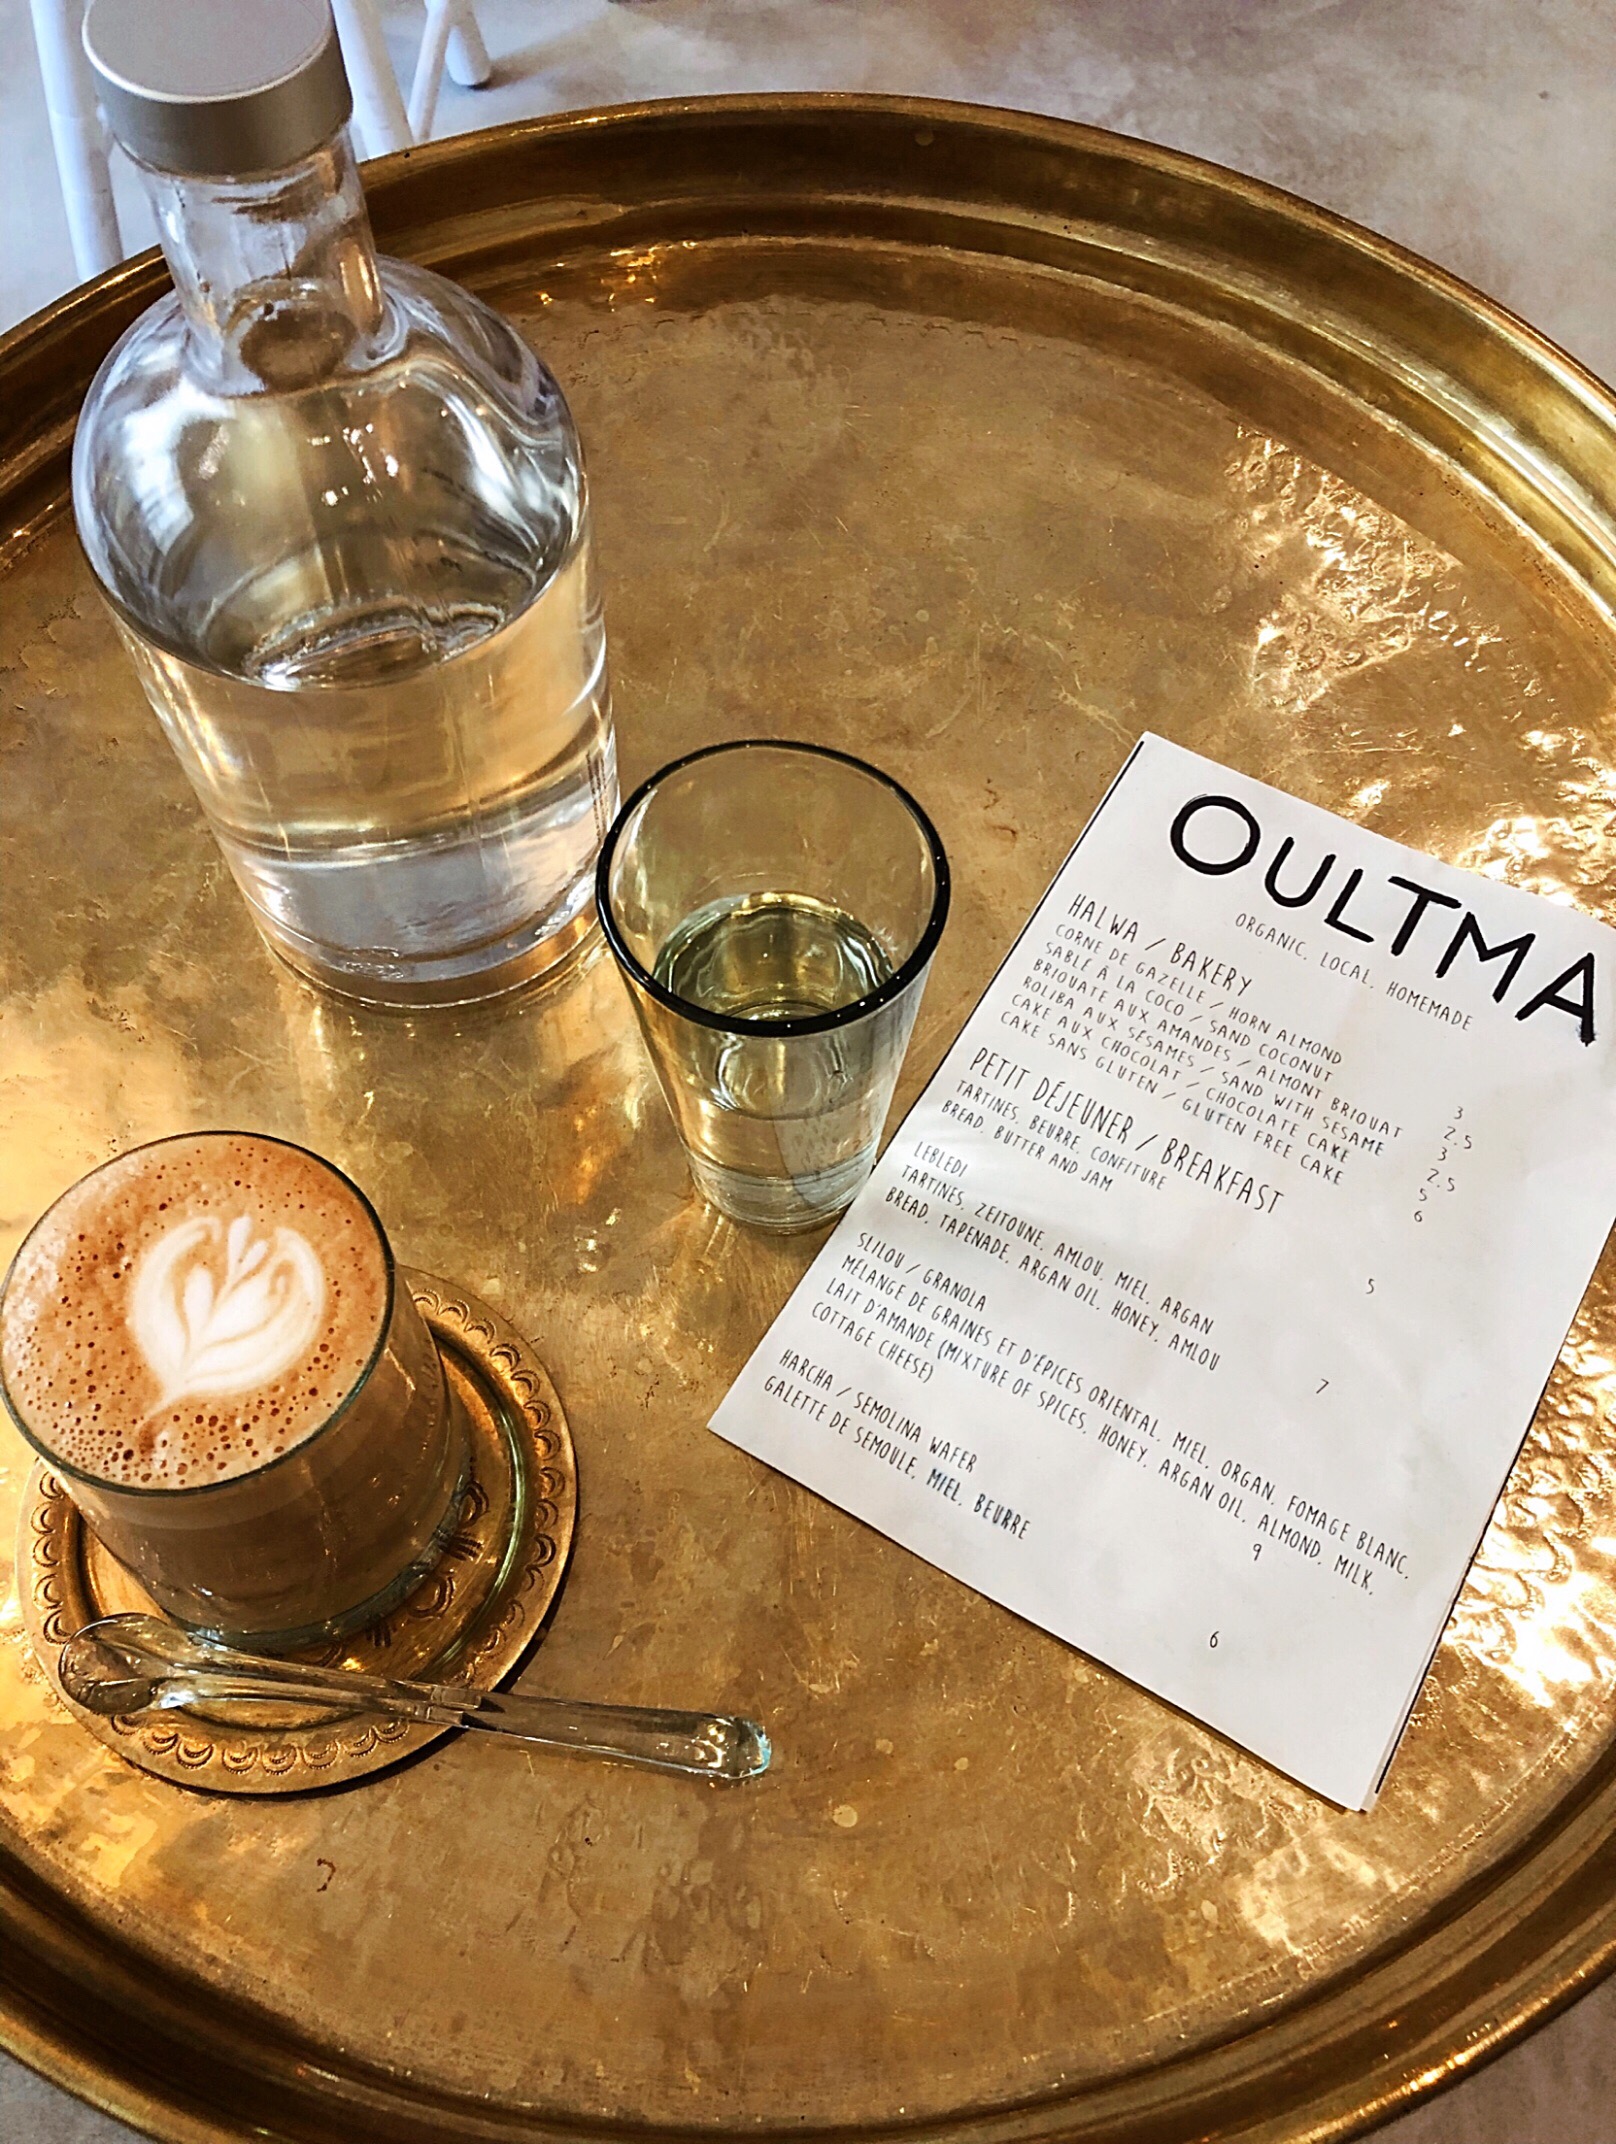 Coffee at the Oultma Paris